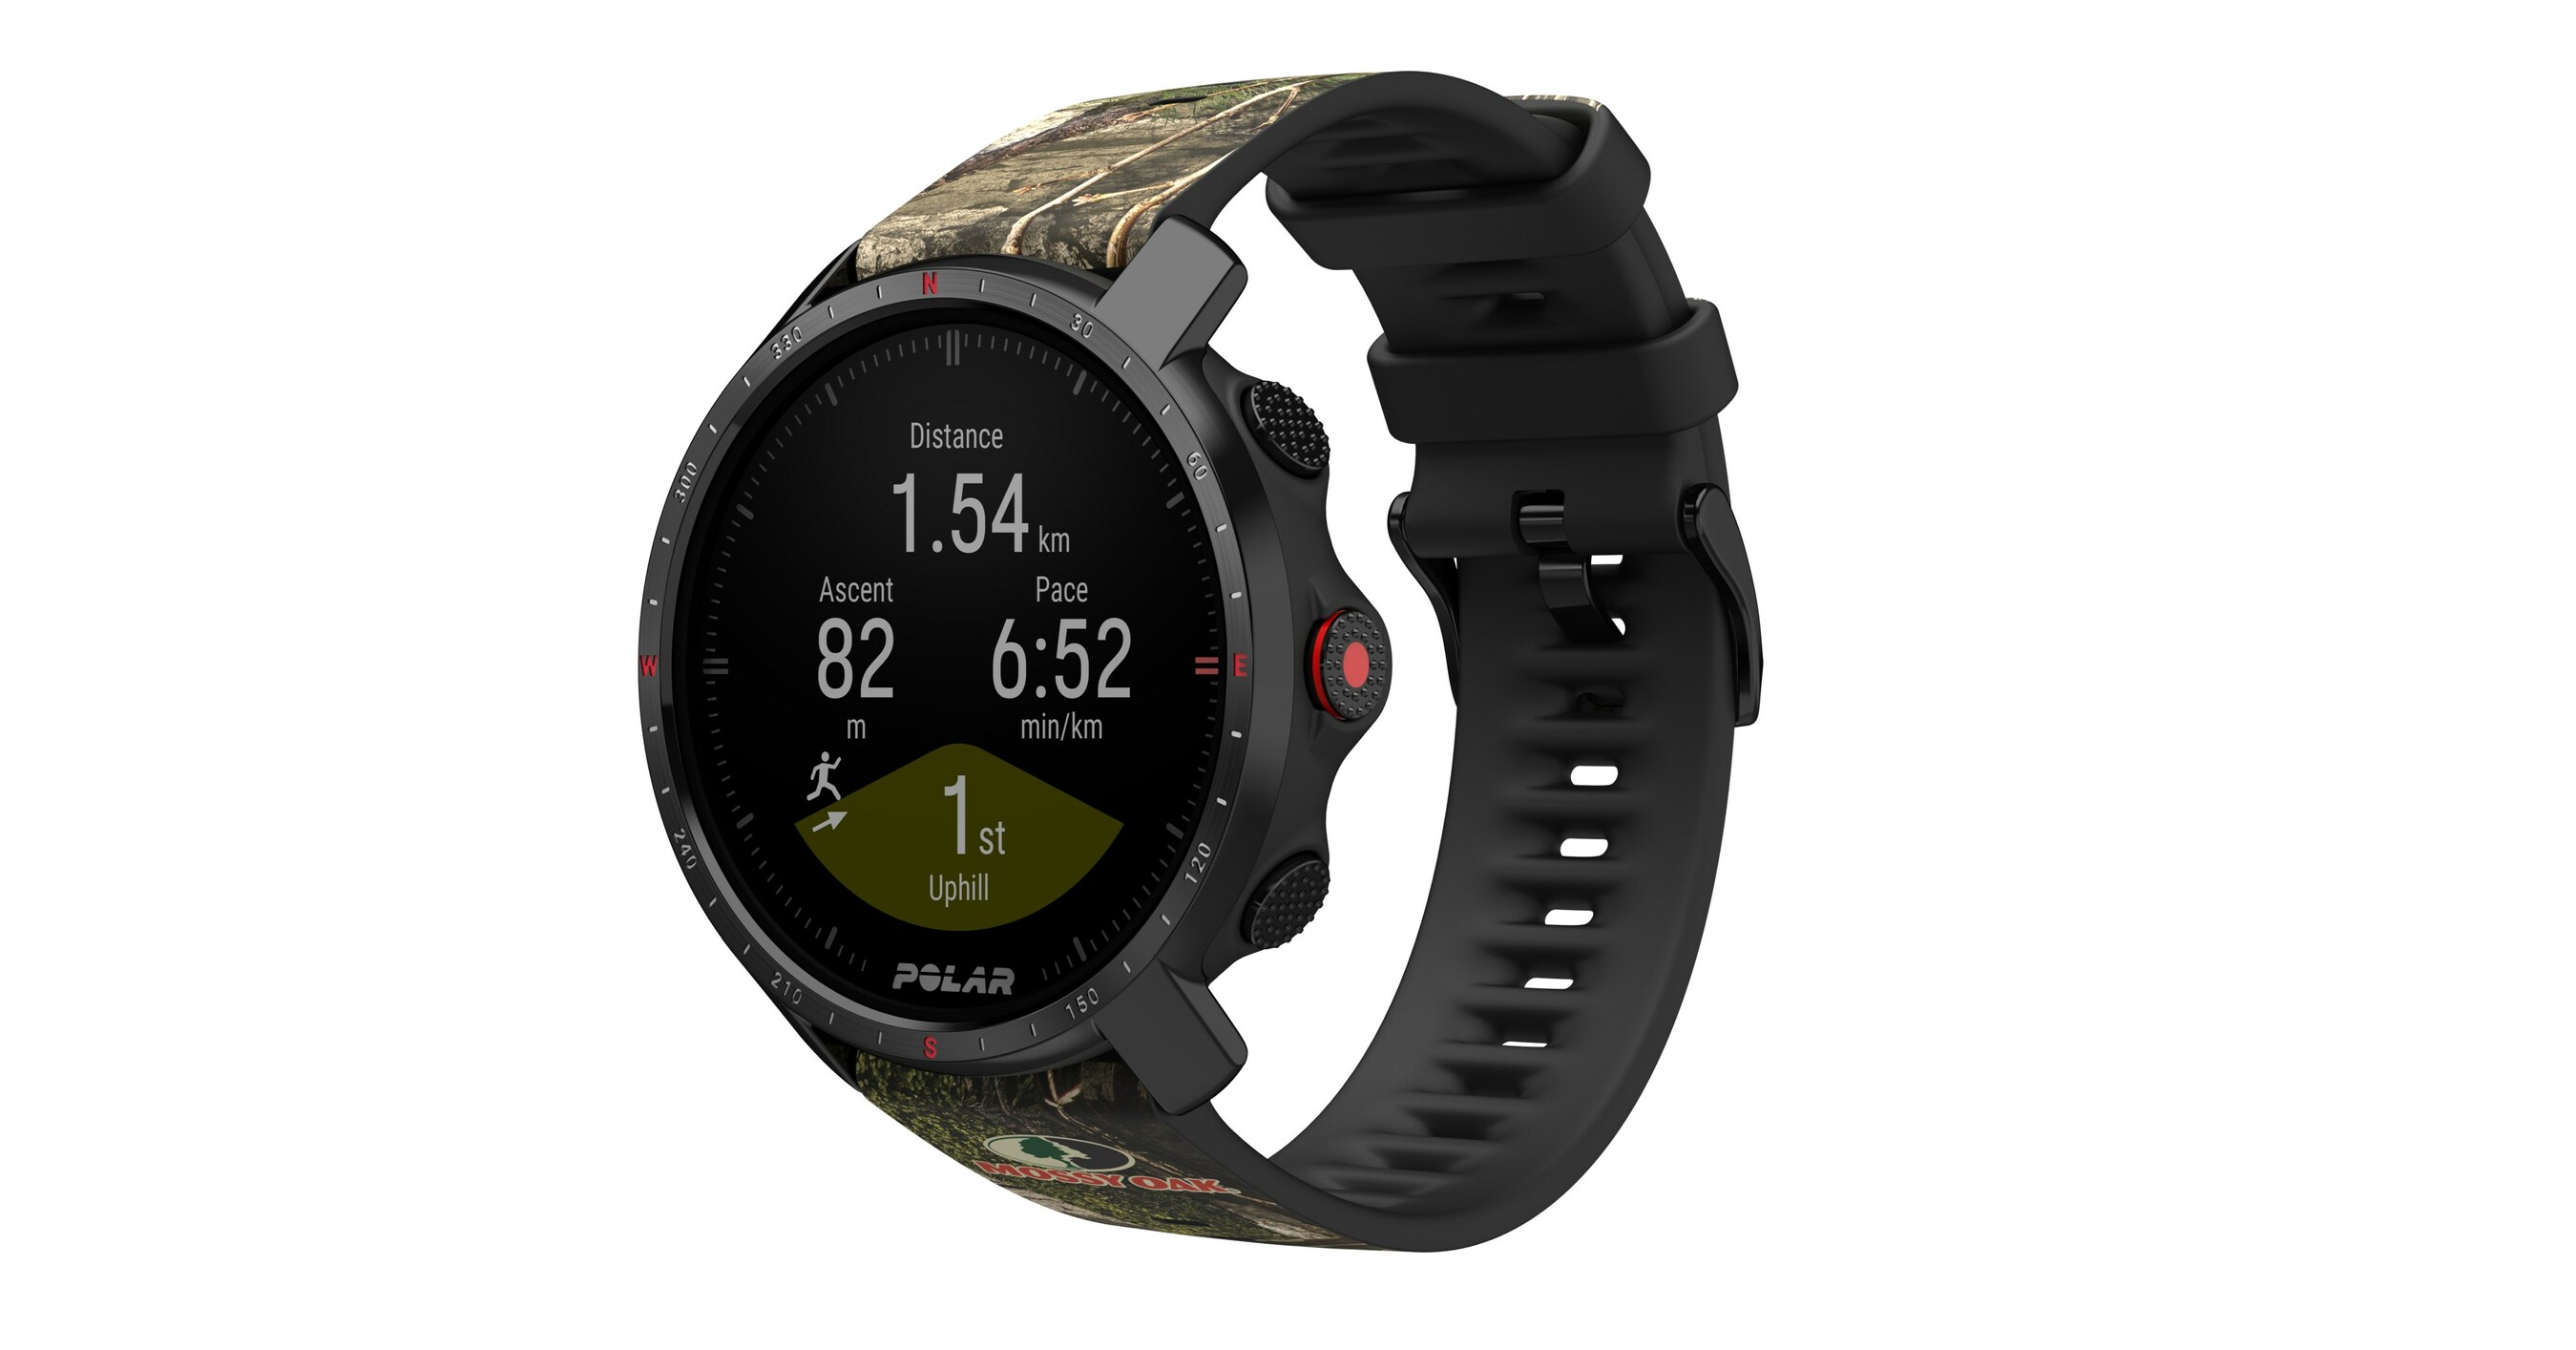 POLAR AND MOSSY OAK INTRODUCE A NEW LINE OF THE POLAR GRIT X PRO FOR OUTDOOR, SPORTS ENTHUSIASTS